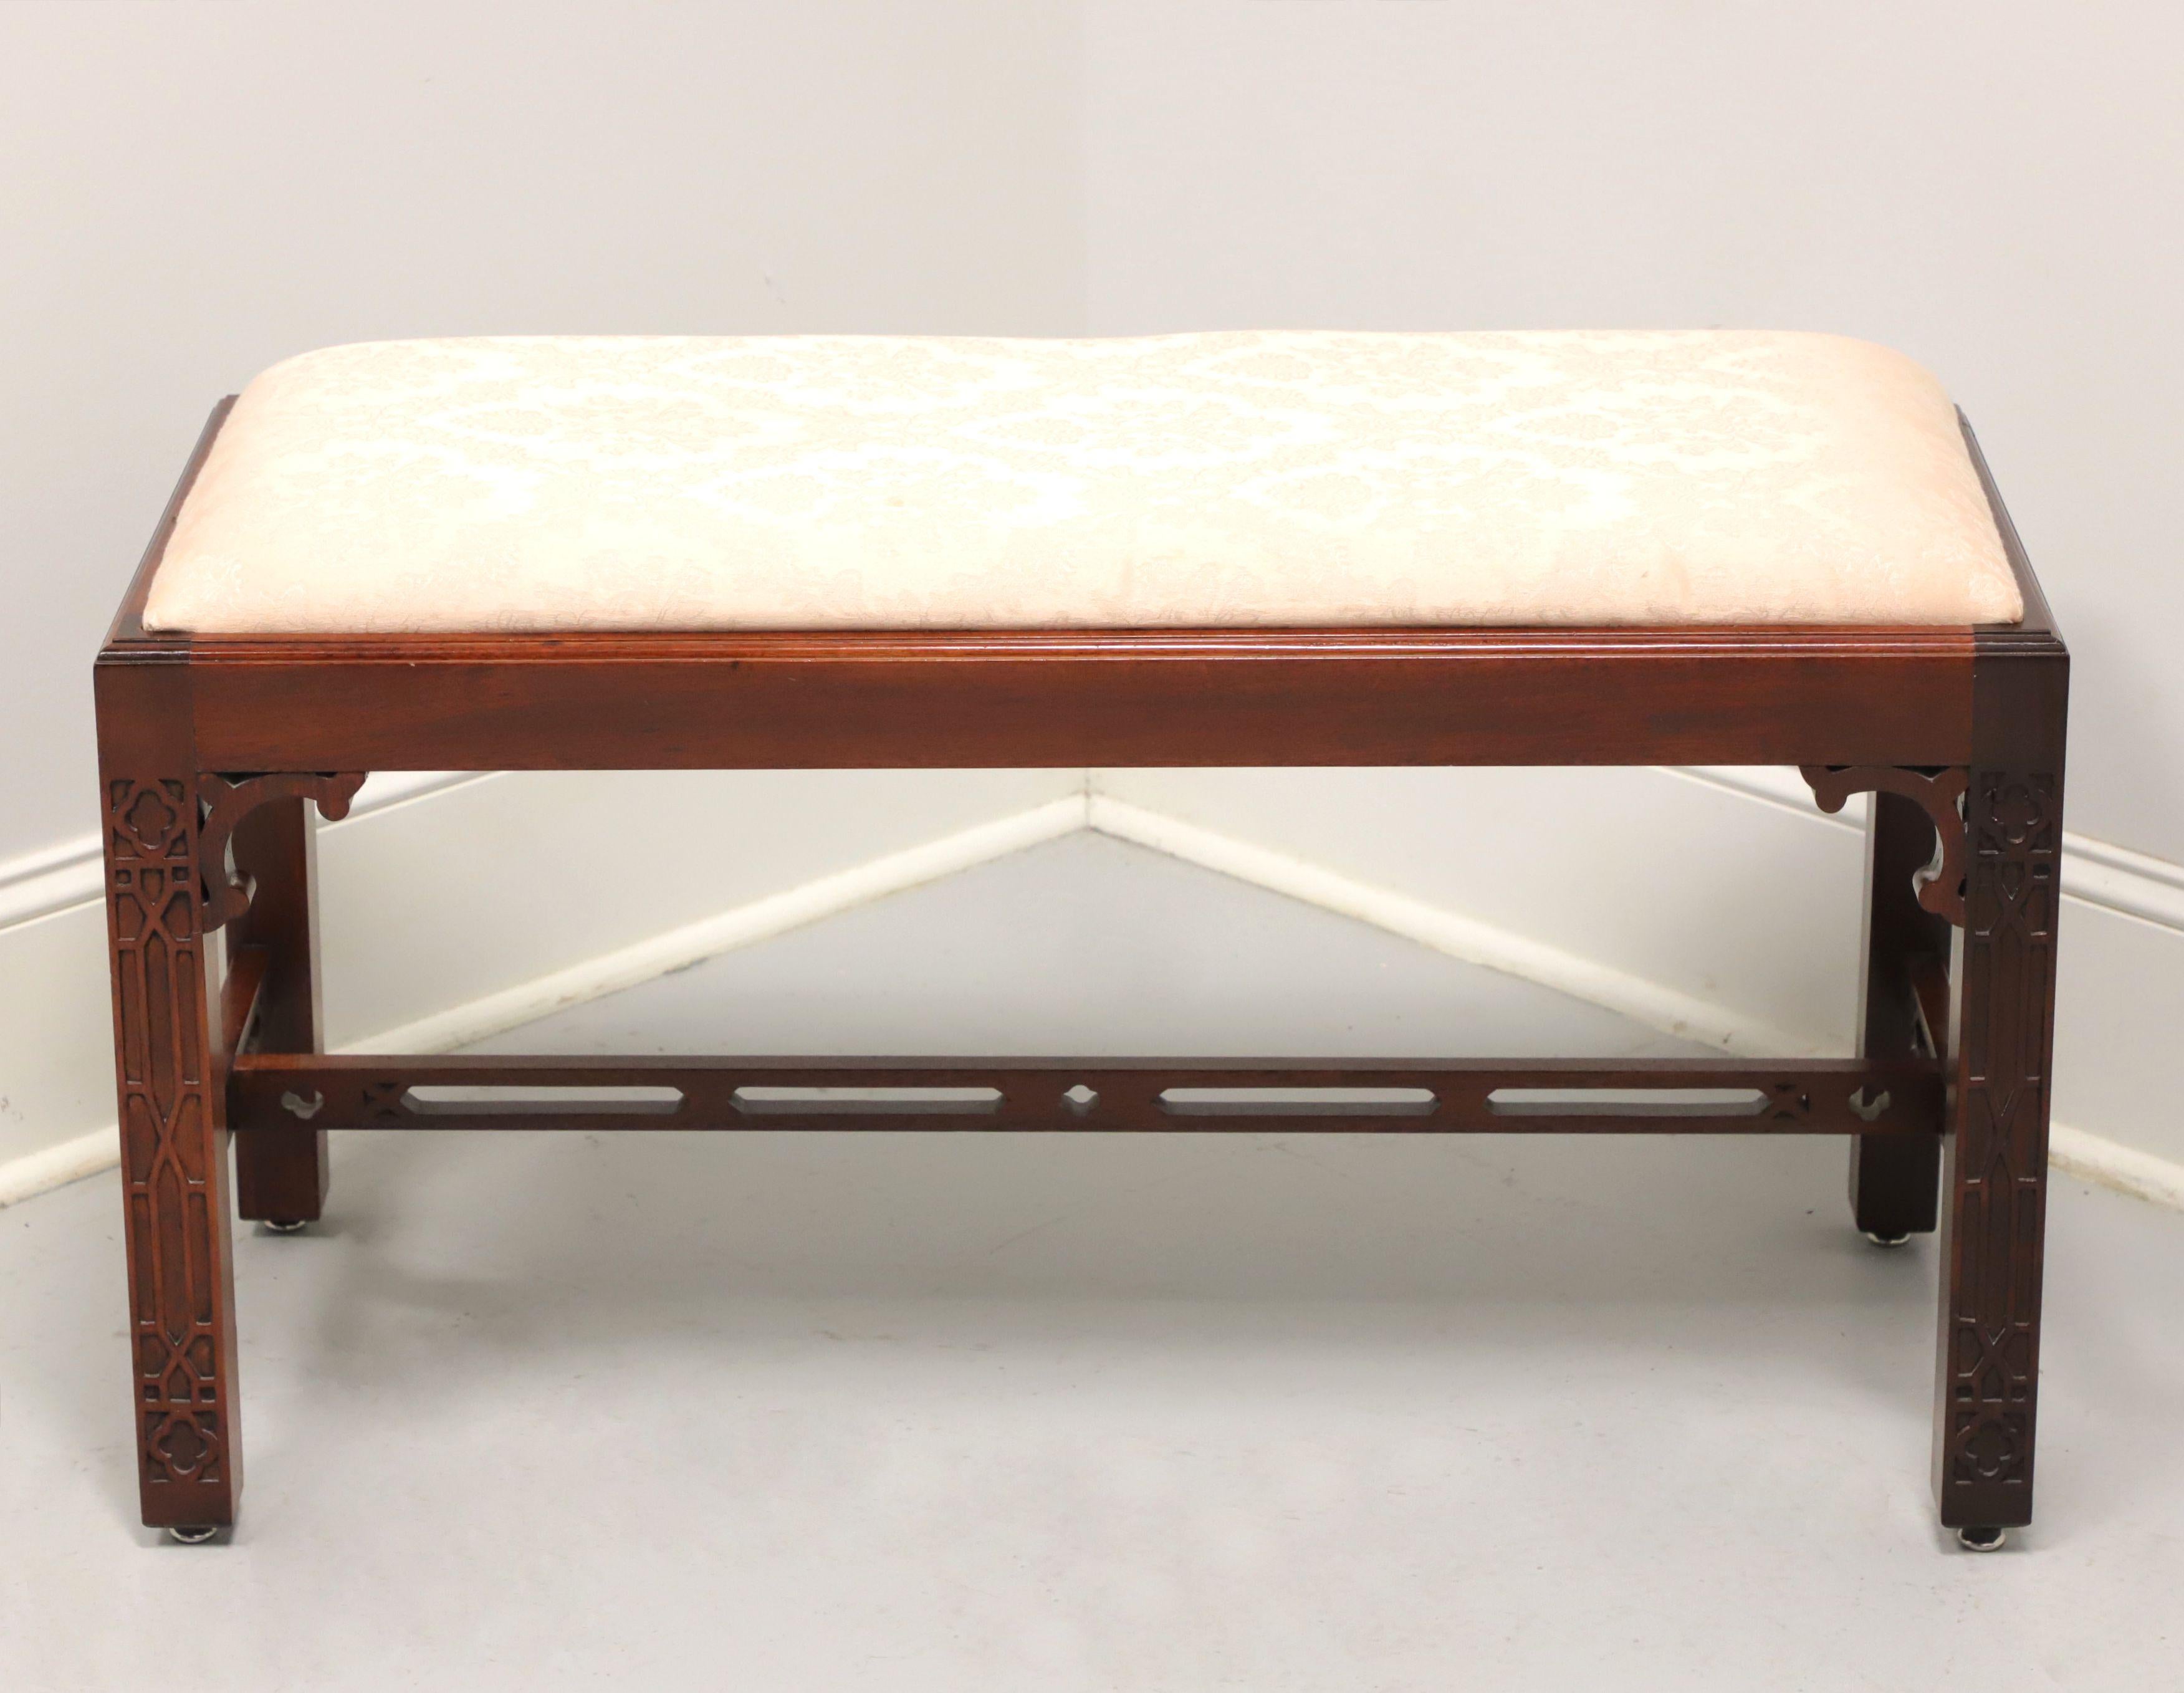 A Chippendale style bench by Baker Furniture, from their Cliveden Place Collection. Solid mahogany, upholstered seat, carved corner pieces, decorative fretwork details to the straight legs, and open carved stretchers. Features a pink color brocade